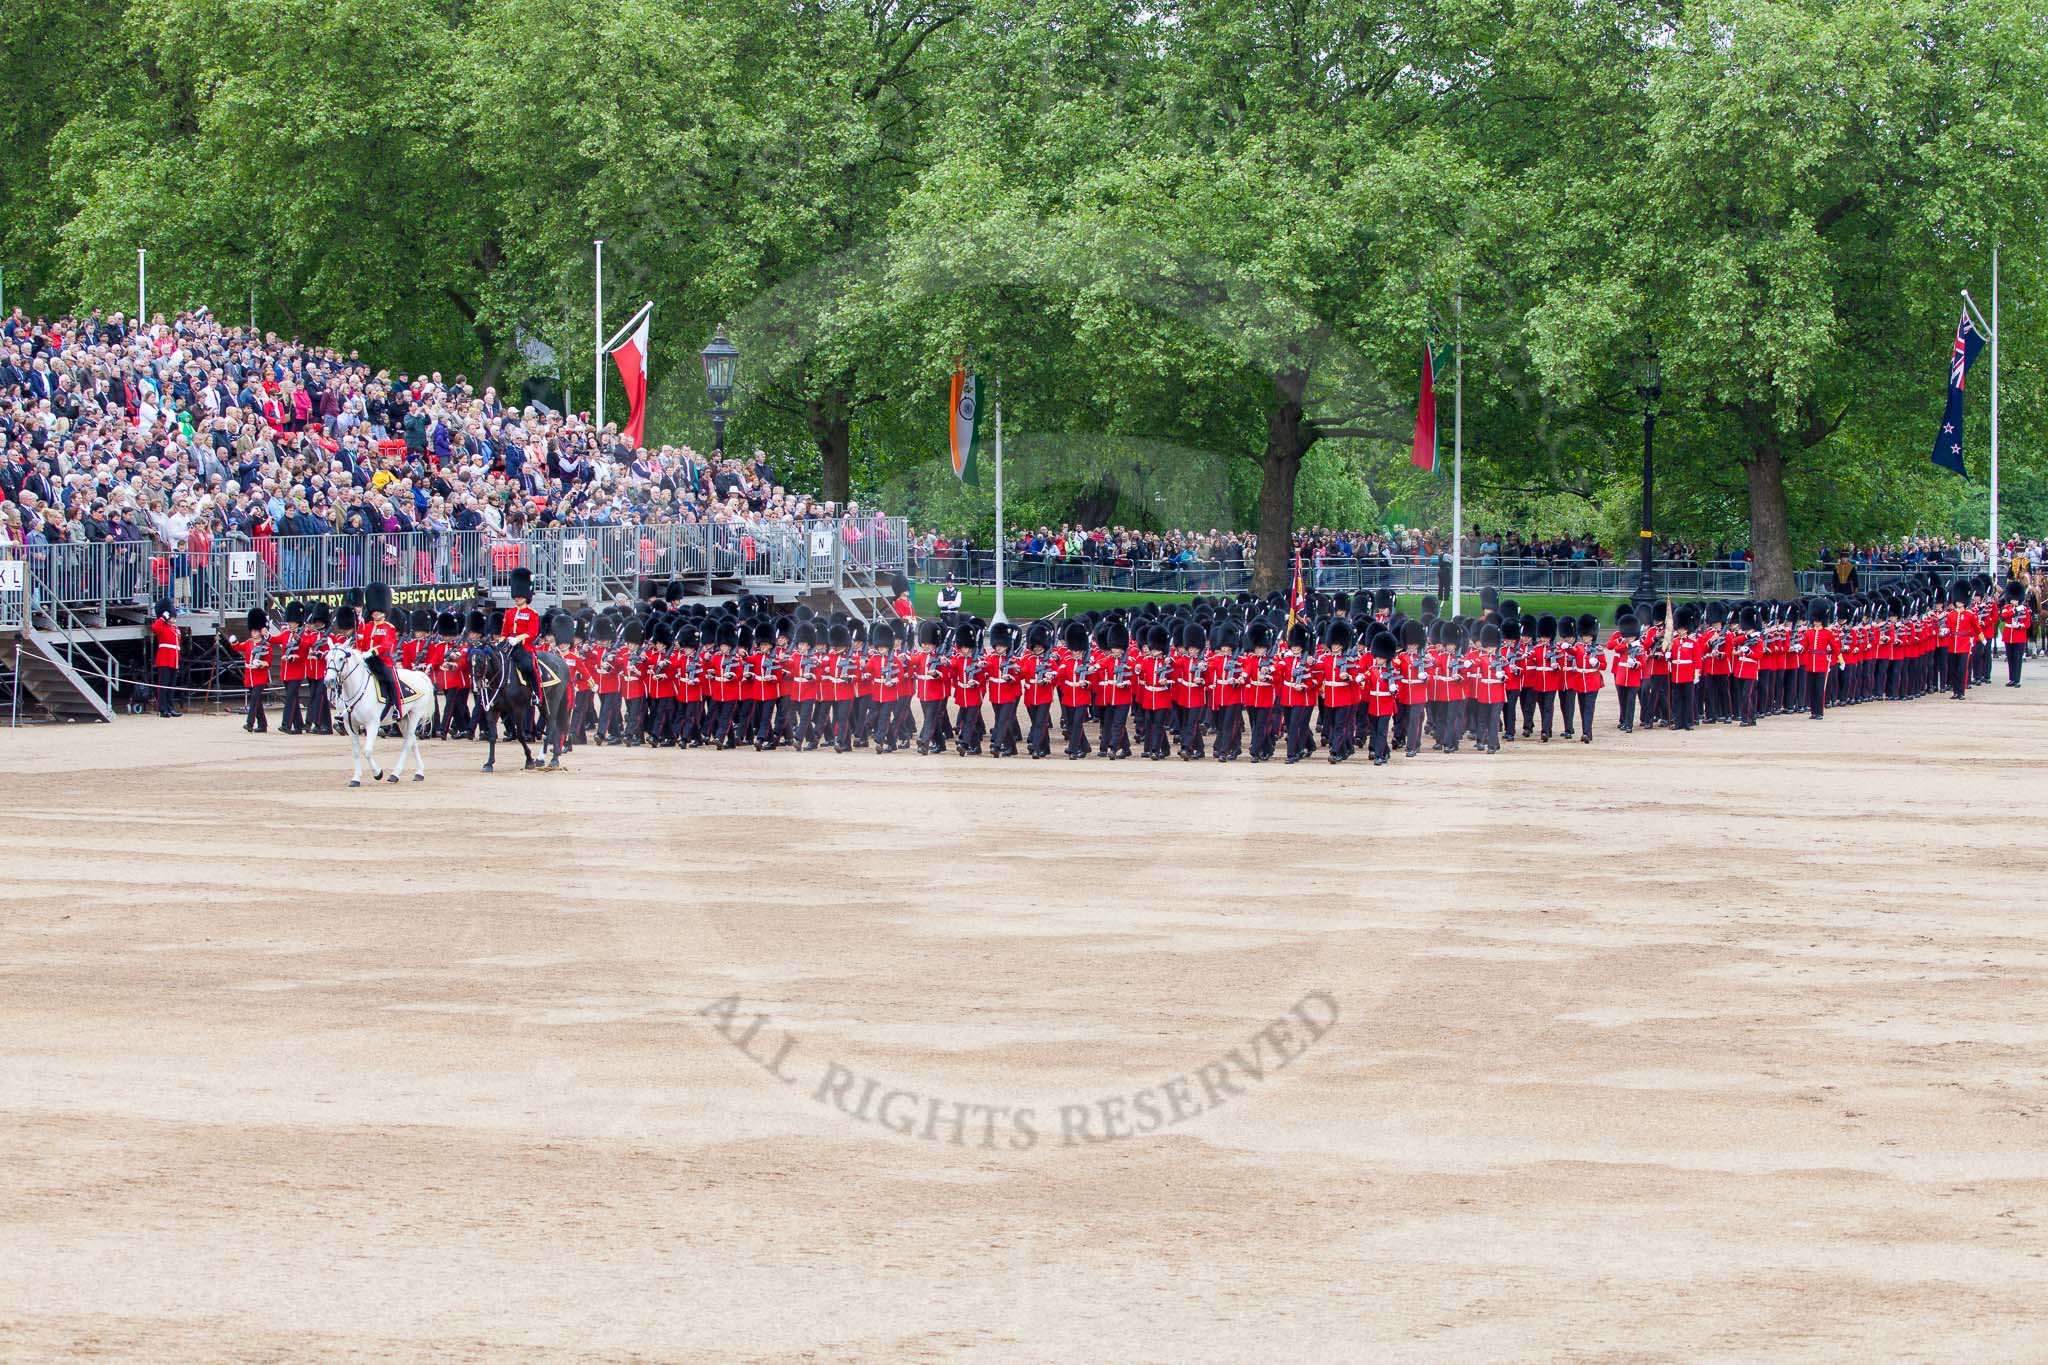 Major General's Review 2013: The March Past in Quick Time - No.1 Guard, the Escort to the Colour, following the Field Officer and the Major of the Parade..
Horse Guards Parade, Westminster,
London SW1,

United Kingdom,
on 01 June 2013 at 11:41, image #532